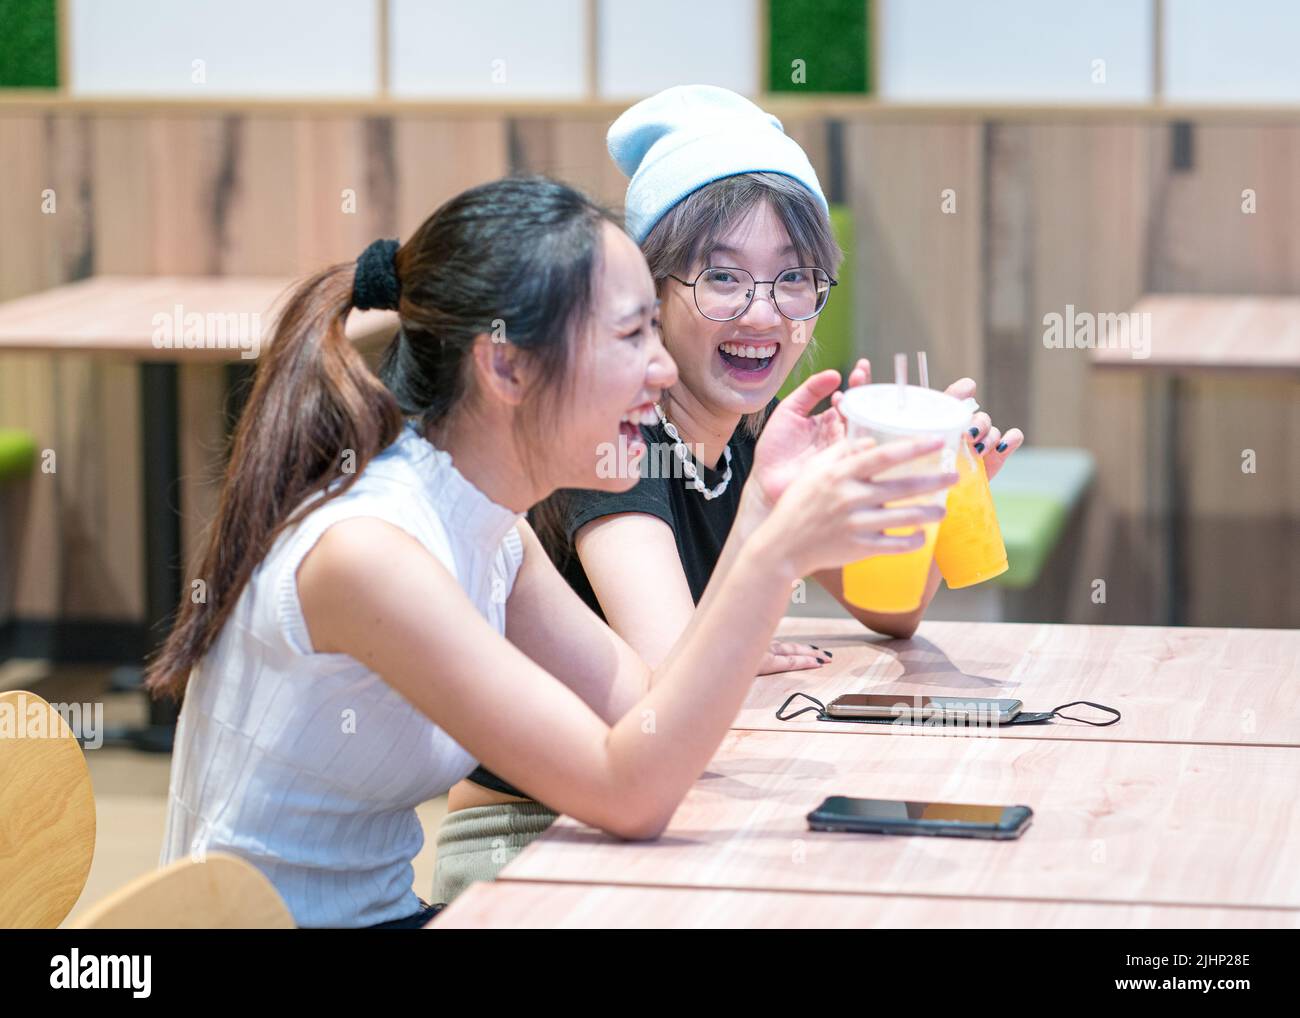 Two girlfriends, Asian ethnicity having a good laugh and a drink in a restaurant. Stock Photo